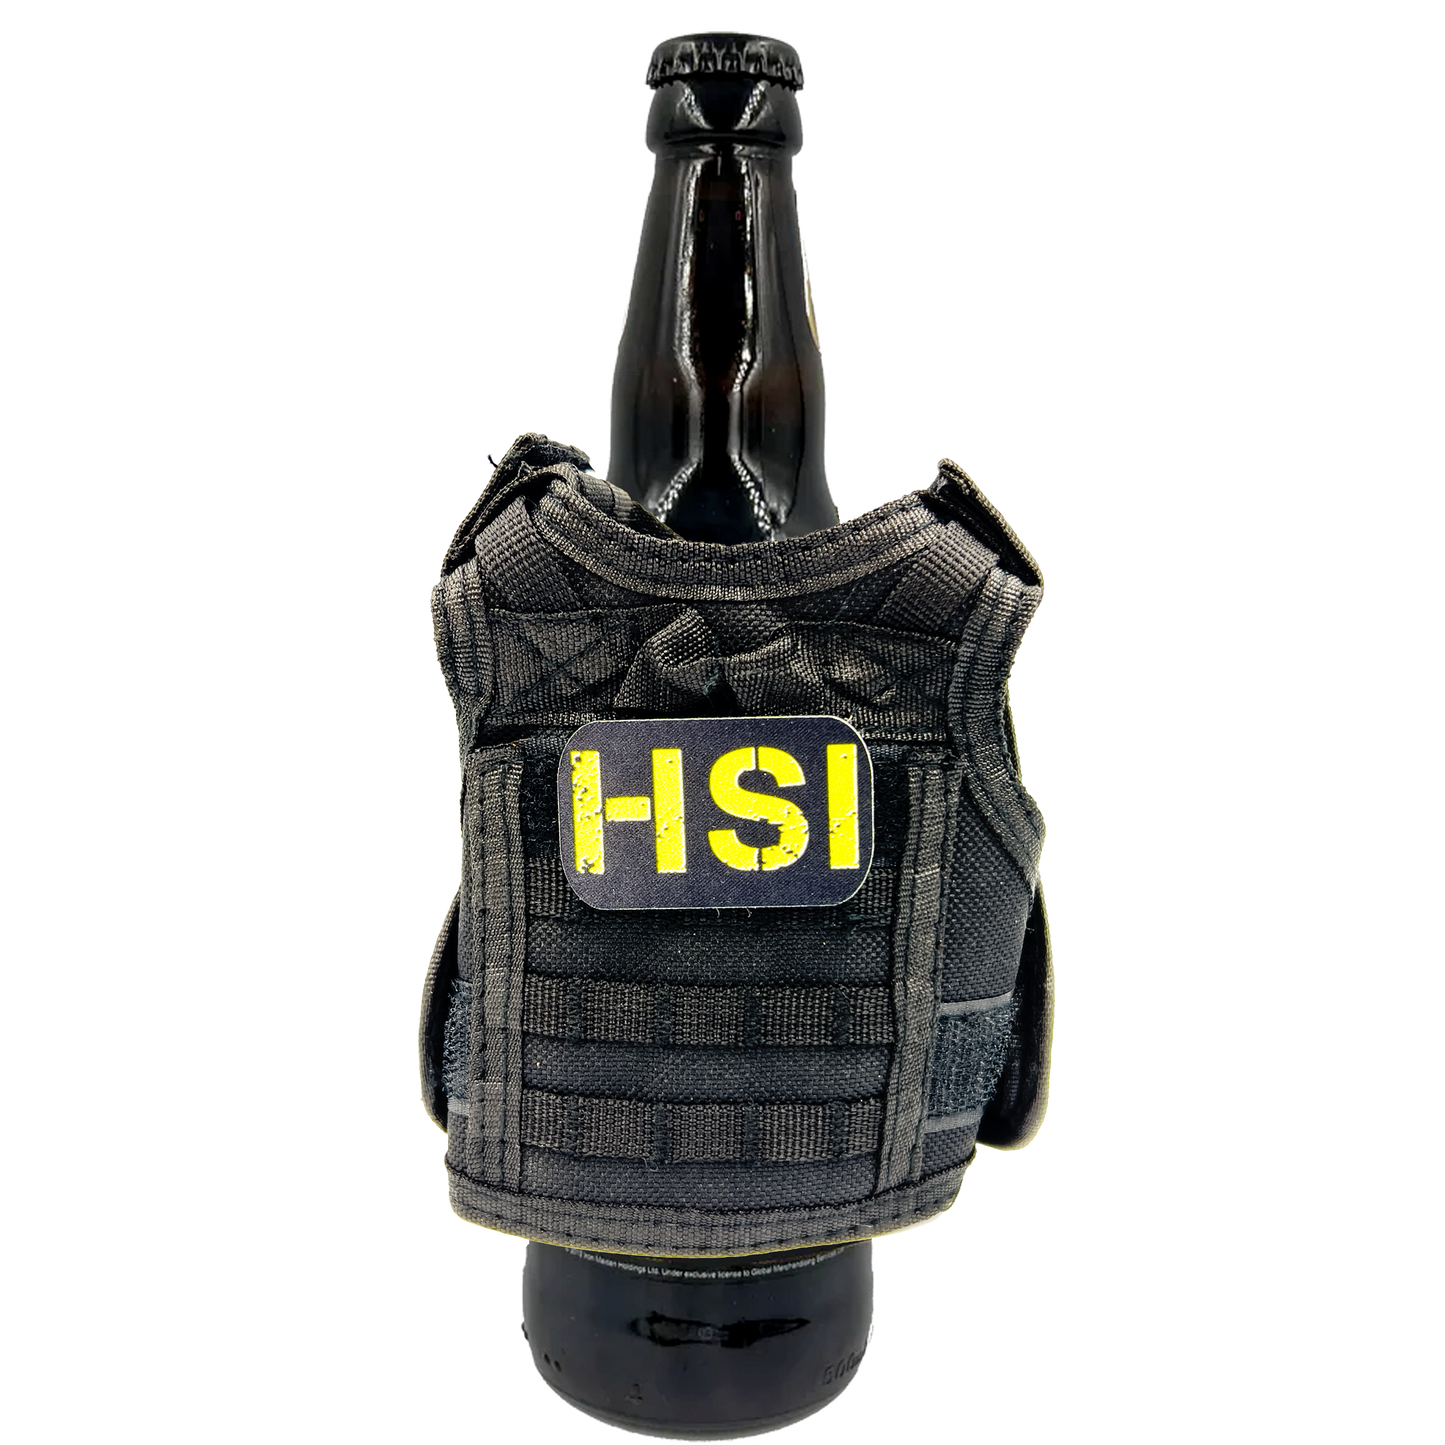 BL2-013 HSI SPECIAL AGENT Tactical Beverage Bottle or Can Cooler Vest with removable patches perfect gift for Challenge Coin collectors